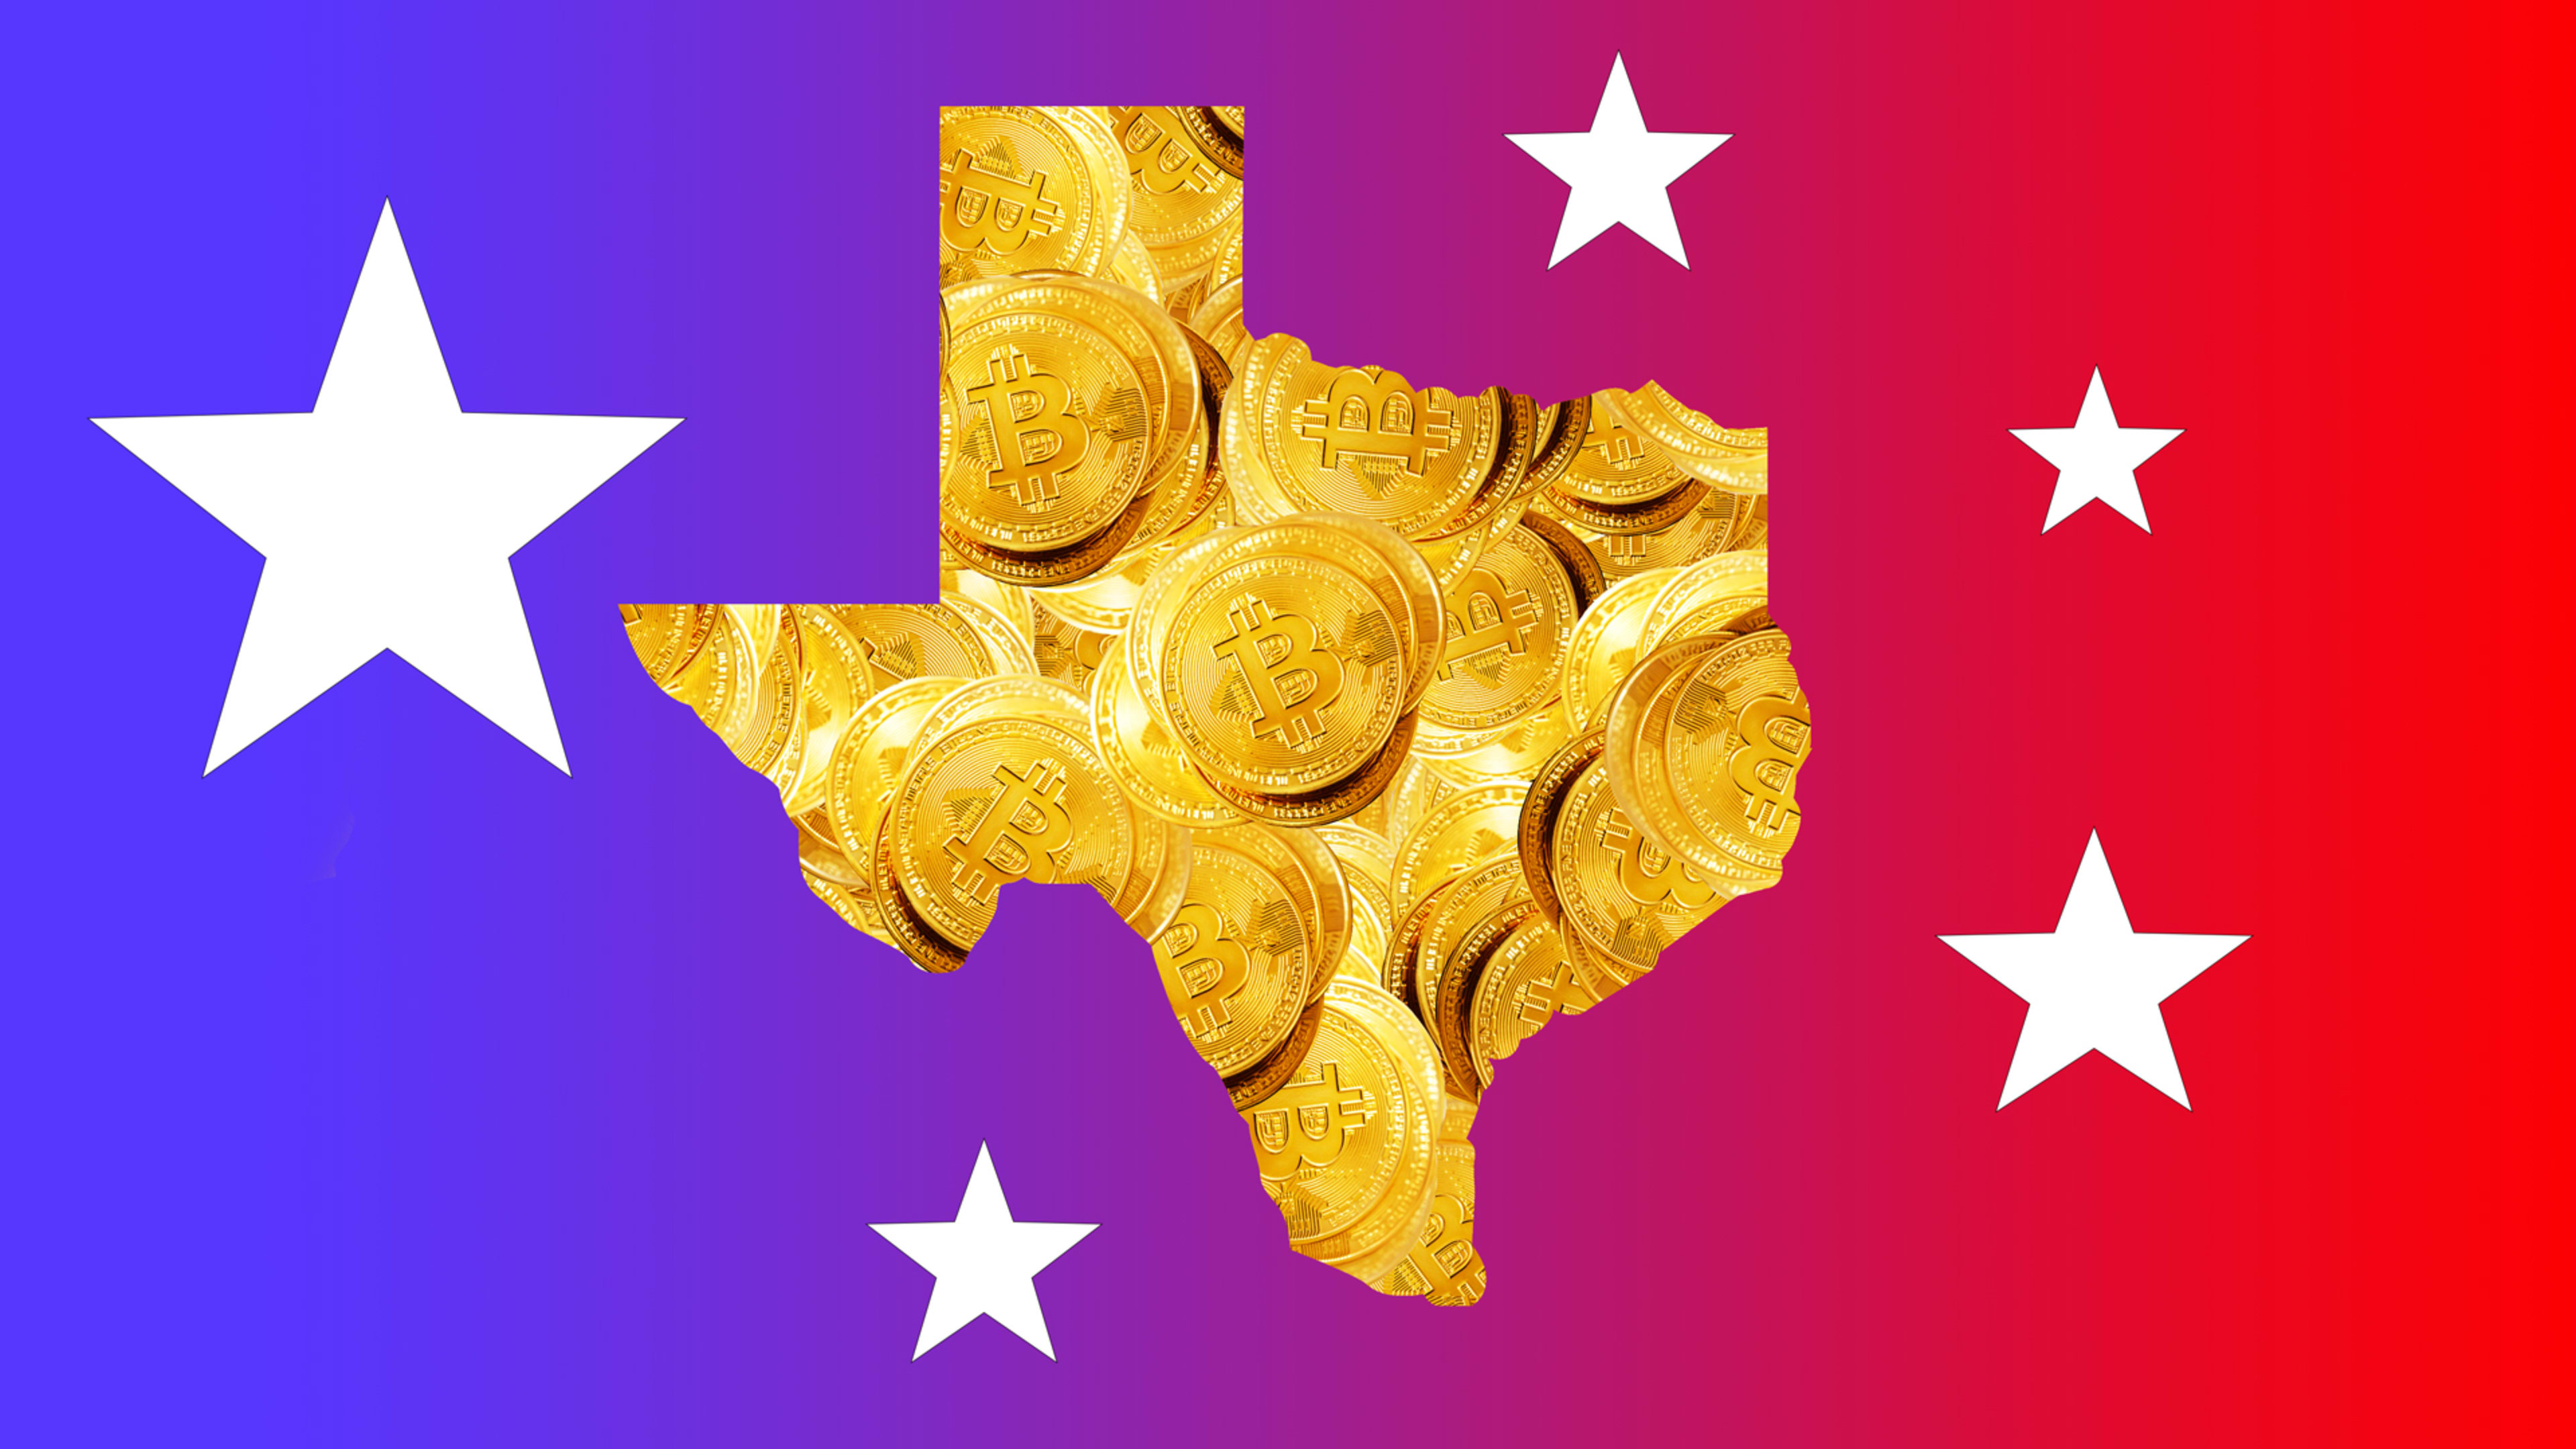 Cryptocurrency miners are Texas-bound. Here’s why